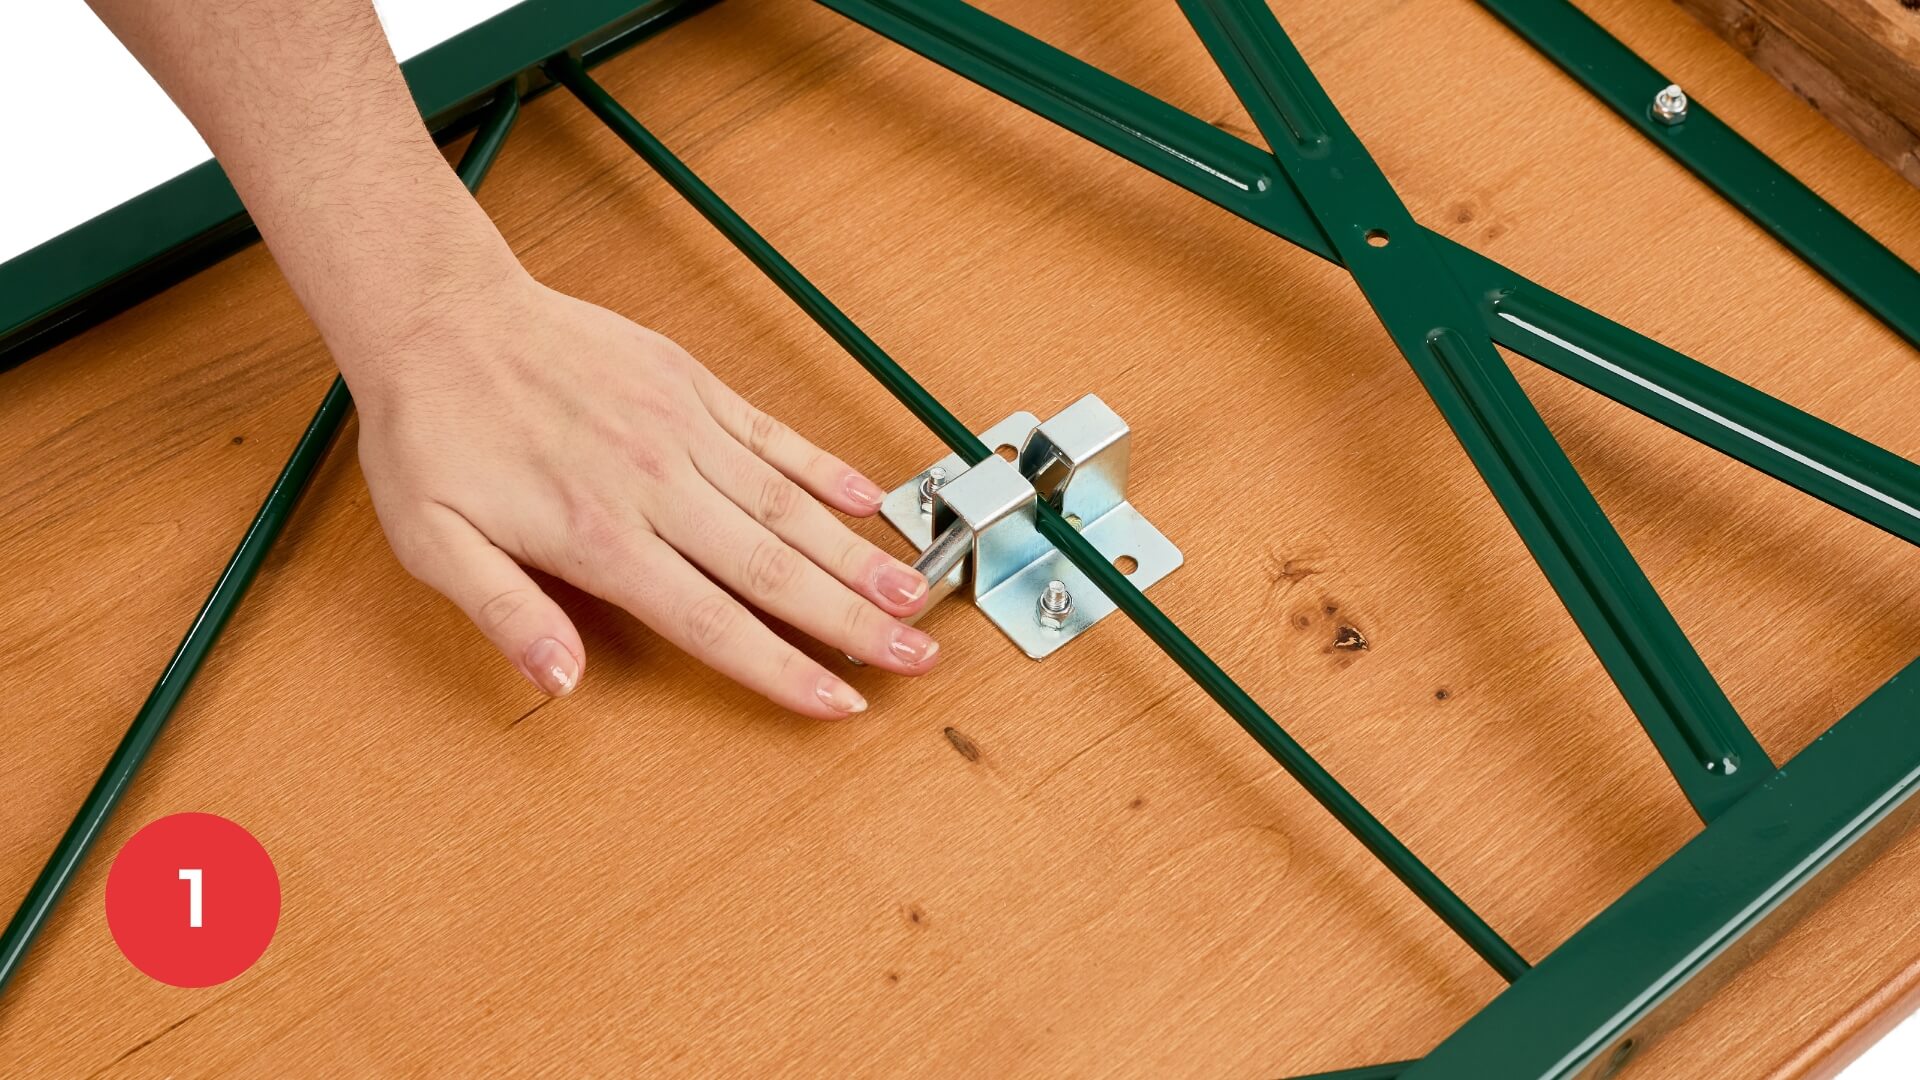 One hand pushes down the lever of the folding furniture lock to assemble the classic beer garden table set.